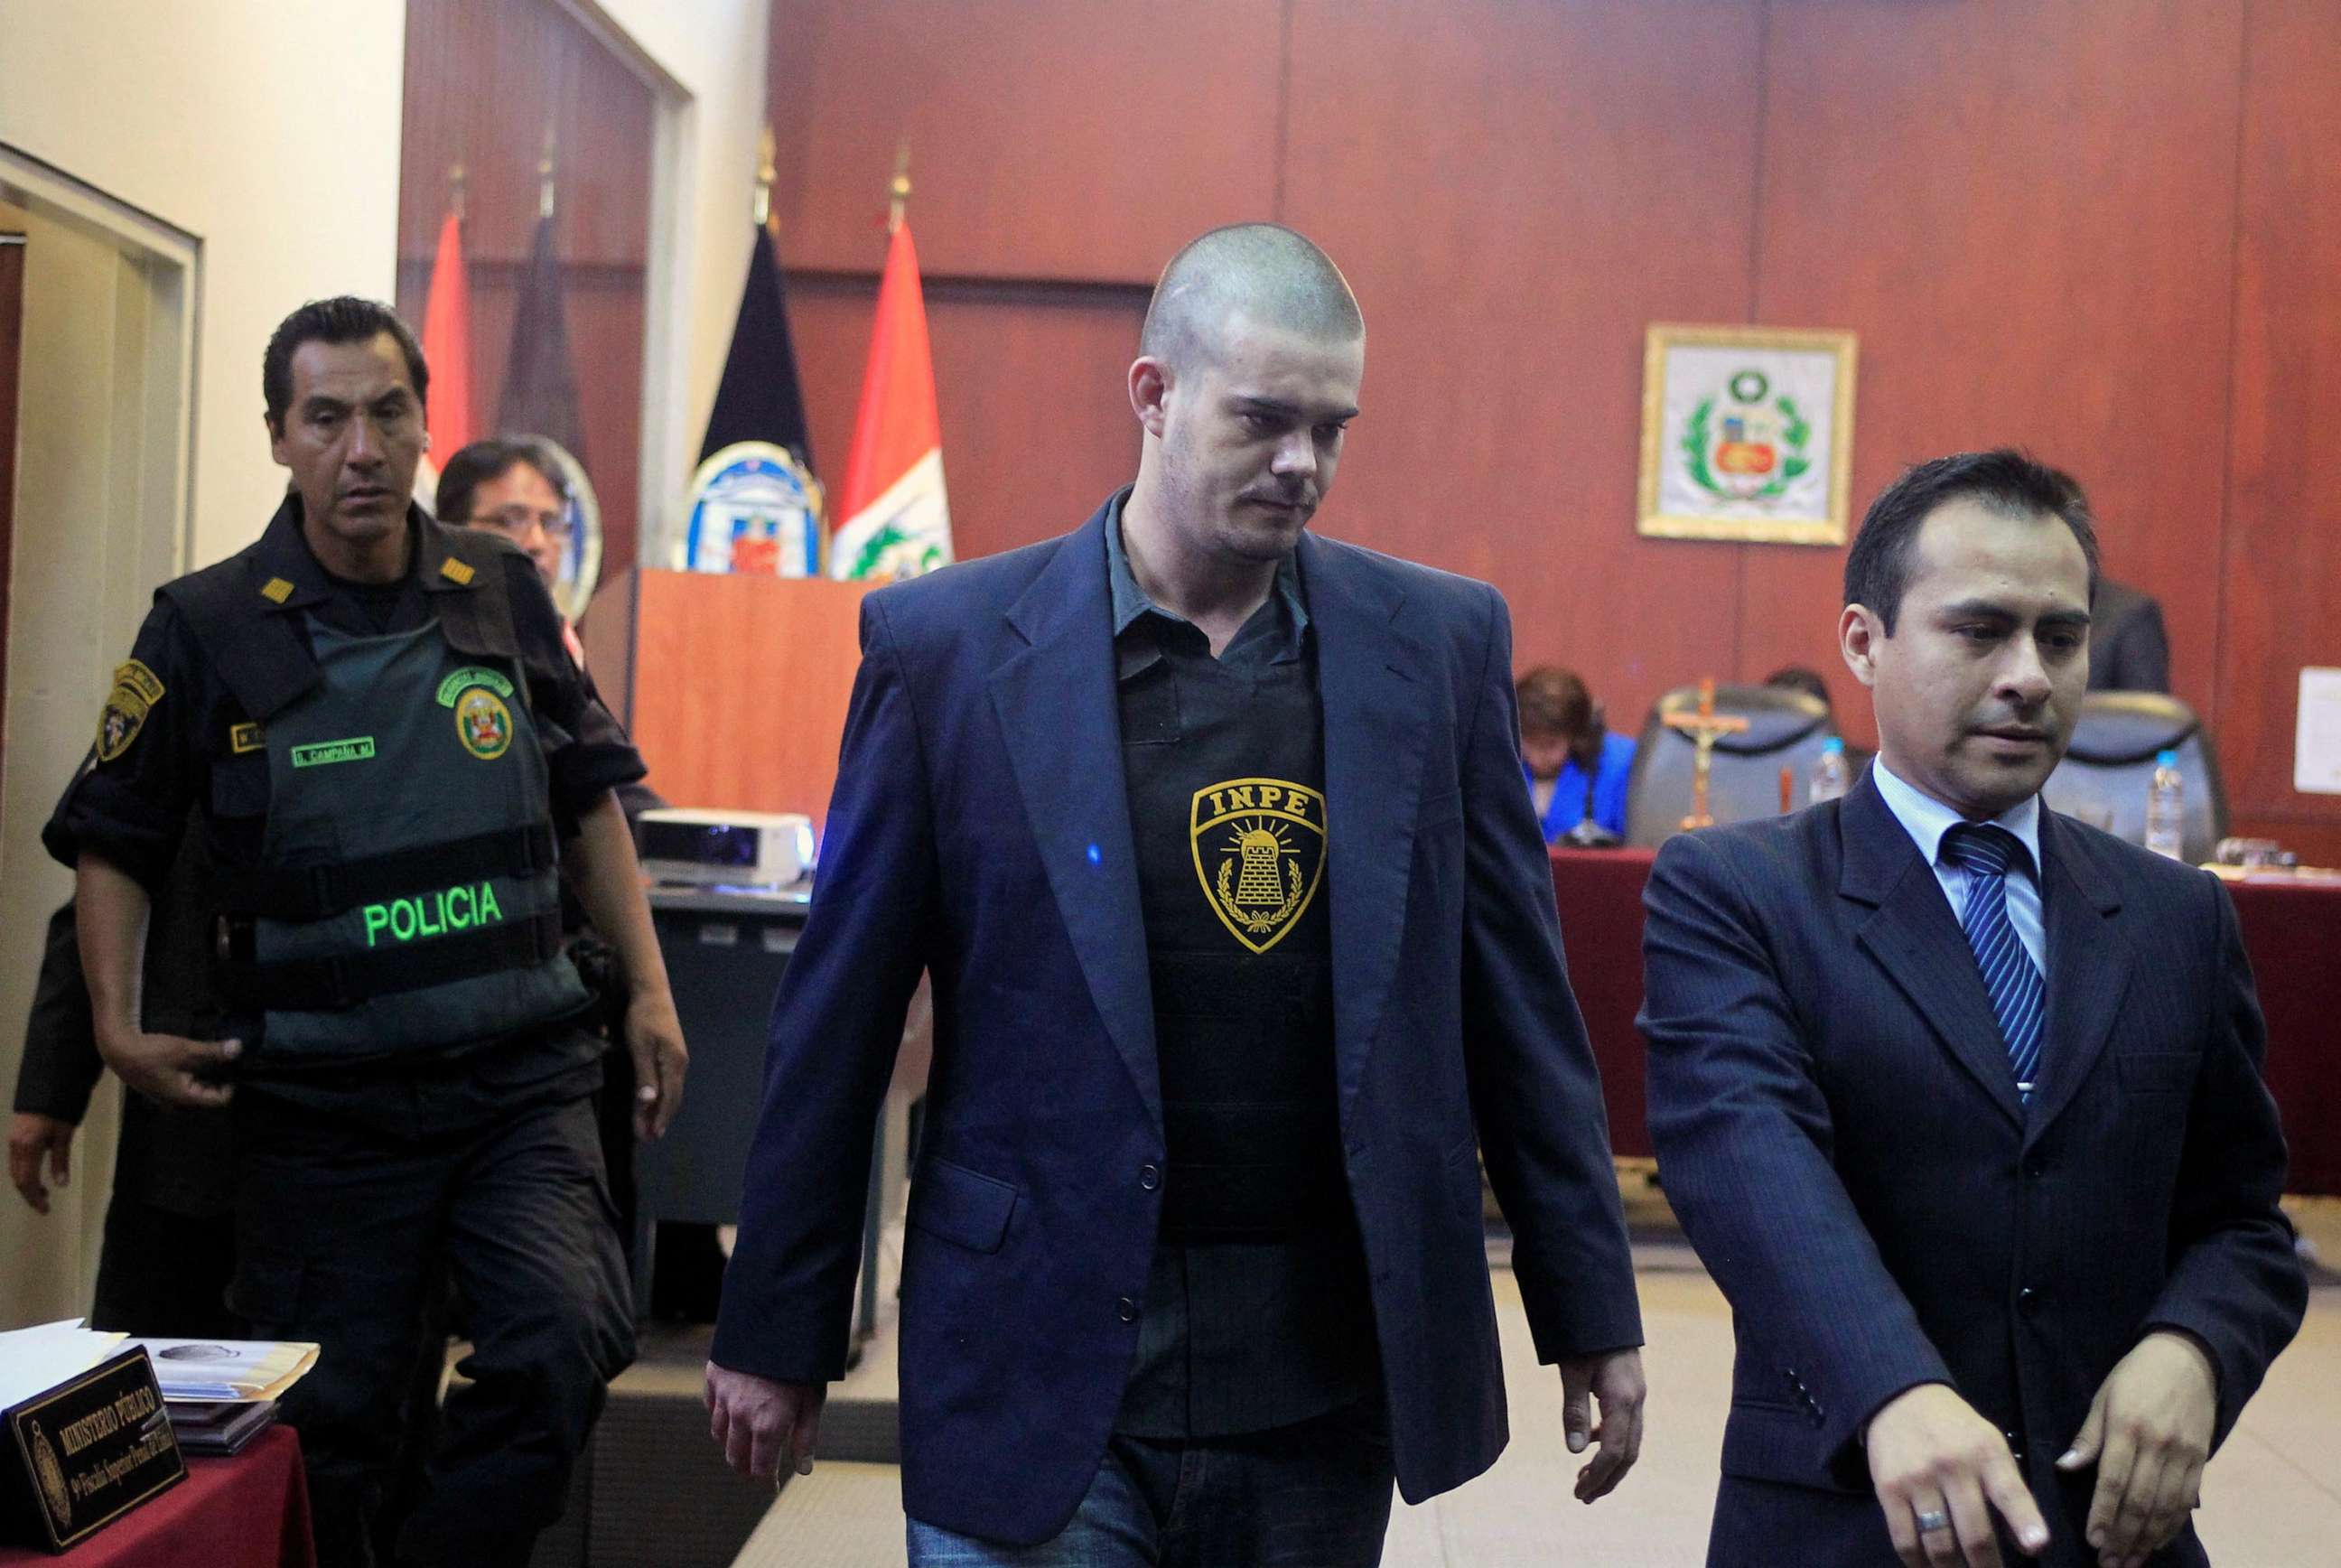 PHOTO: In this Jan. 6, 2012, file photo, Dutch citizen Joran Van der Sloot enters the courtroom in the Lurigancho prison in Lima, Peru.